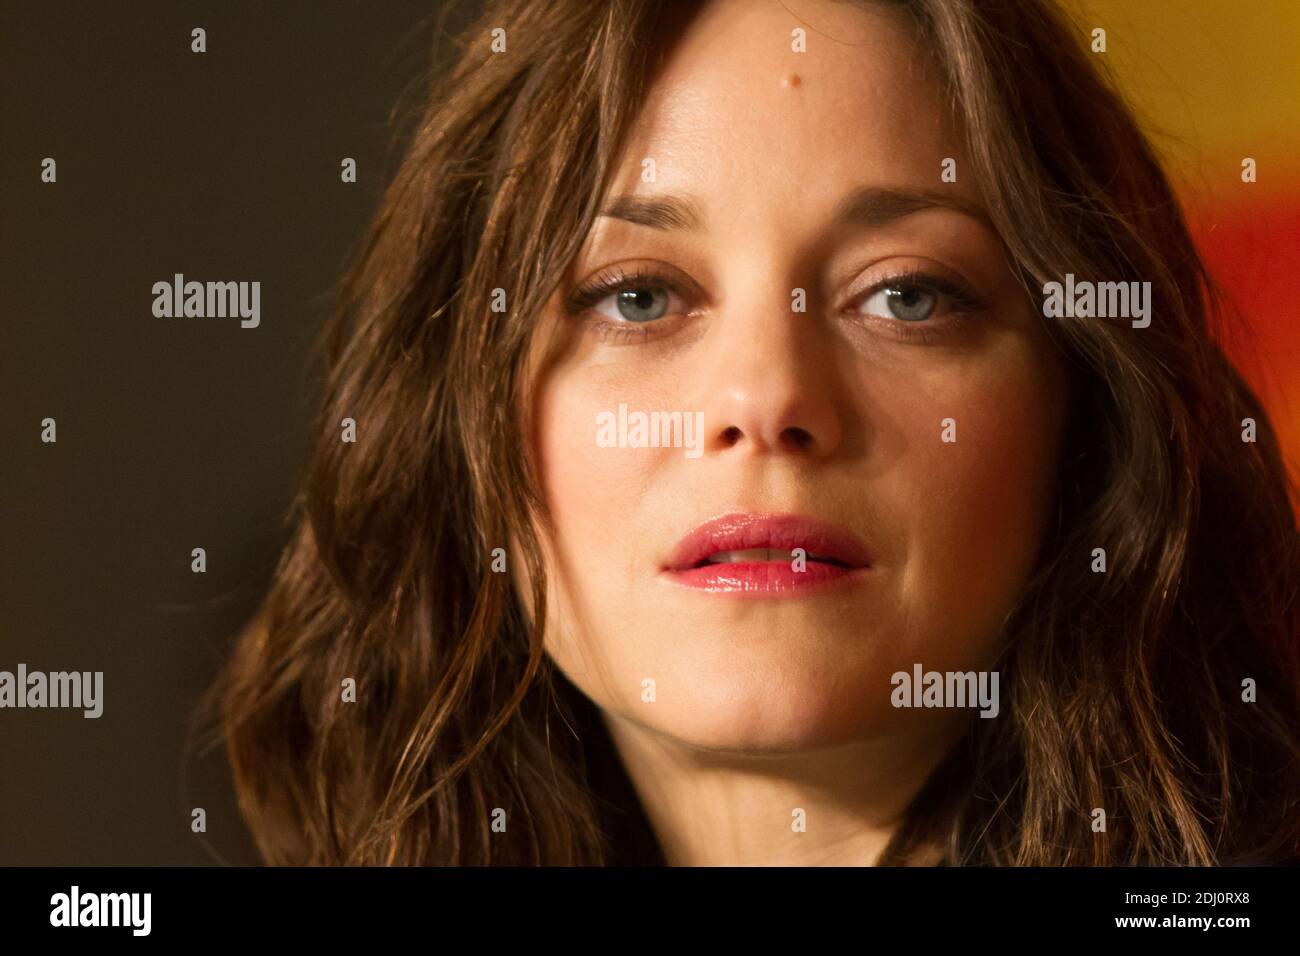 Marion Cottillard attends 'Mal de Pierres' - 'From The Land And The Moon' press conference during the 69th annual Cannes Film Festival at the Palais des Festivals on May 15, 2016 in Cannes, France. Photo by ABACAPRESS.COM Stock Photo